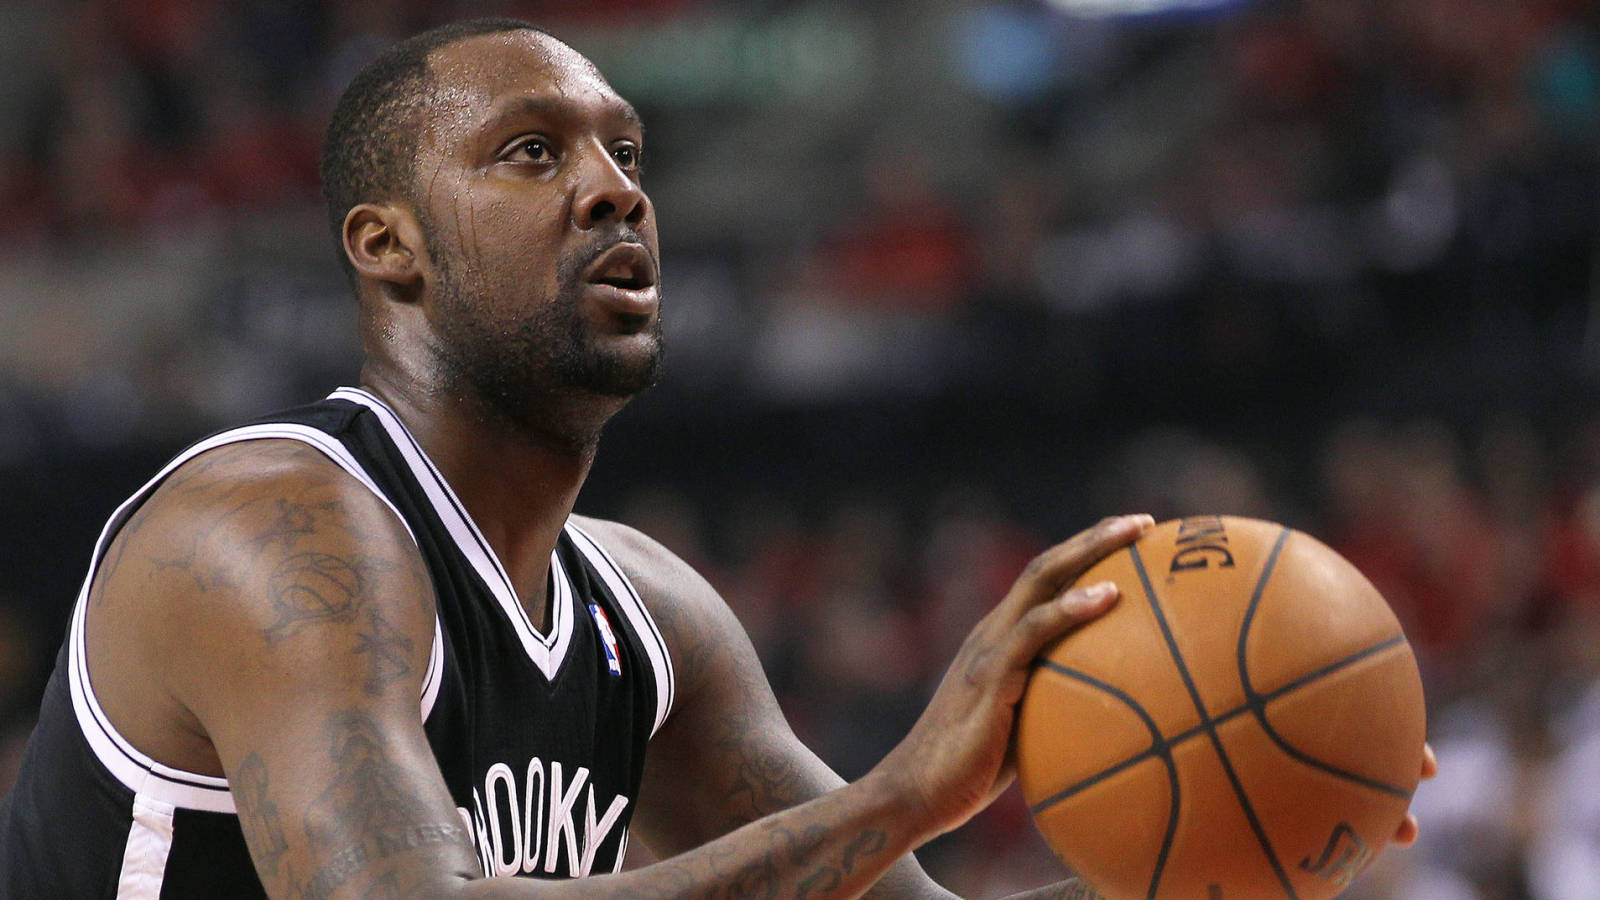 Report: Ex-NBA player used to show up drunk to Nets practice